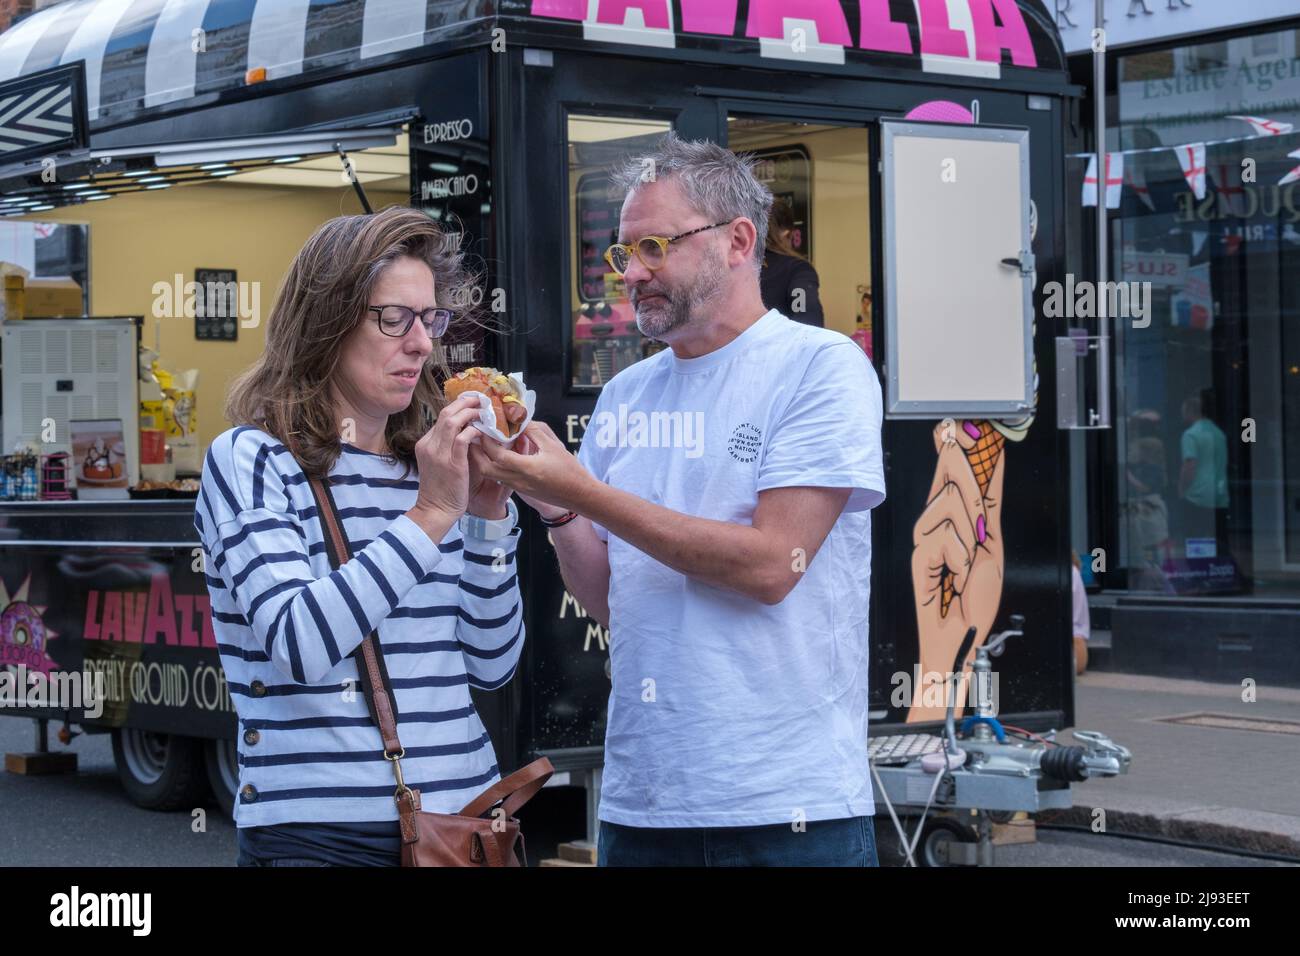 Man with glasses helps a woman with her street food hotdog at 2022 St George’s Day Celebration at Pinner, Harrow, Greater London, England. Stock Photo